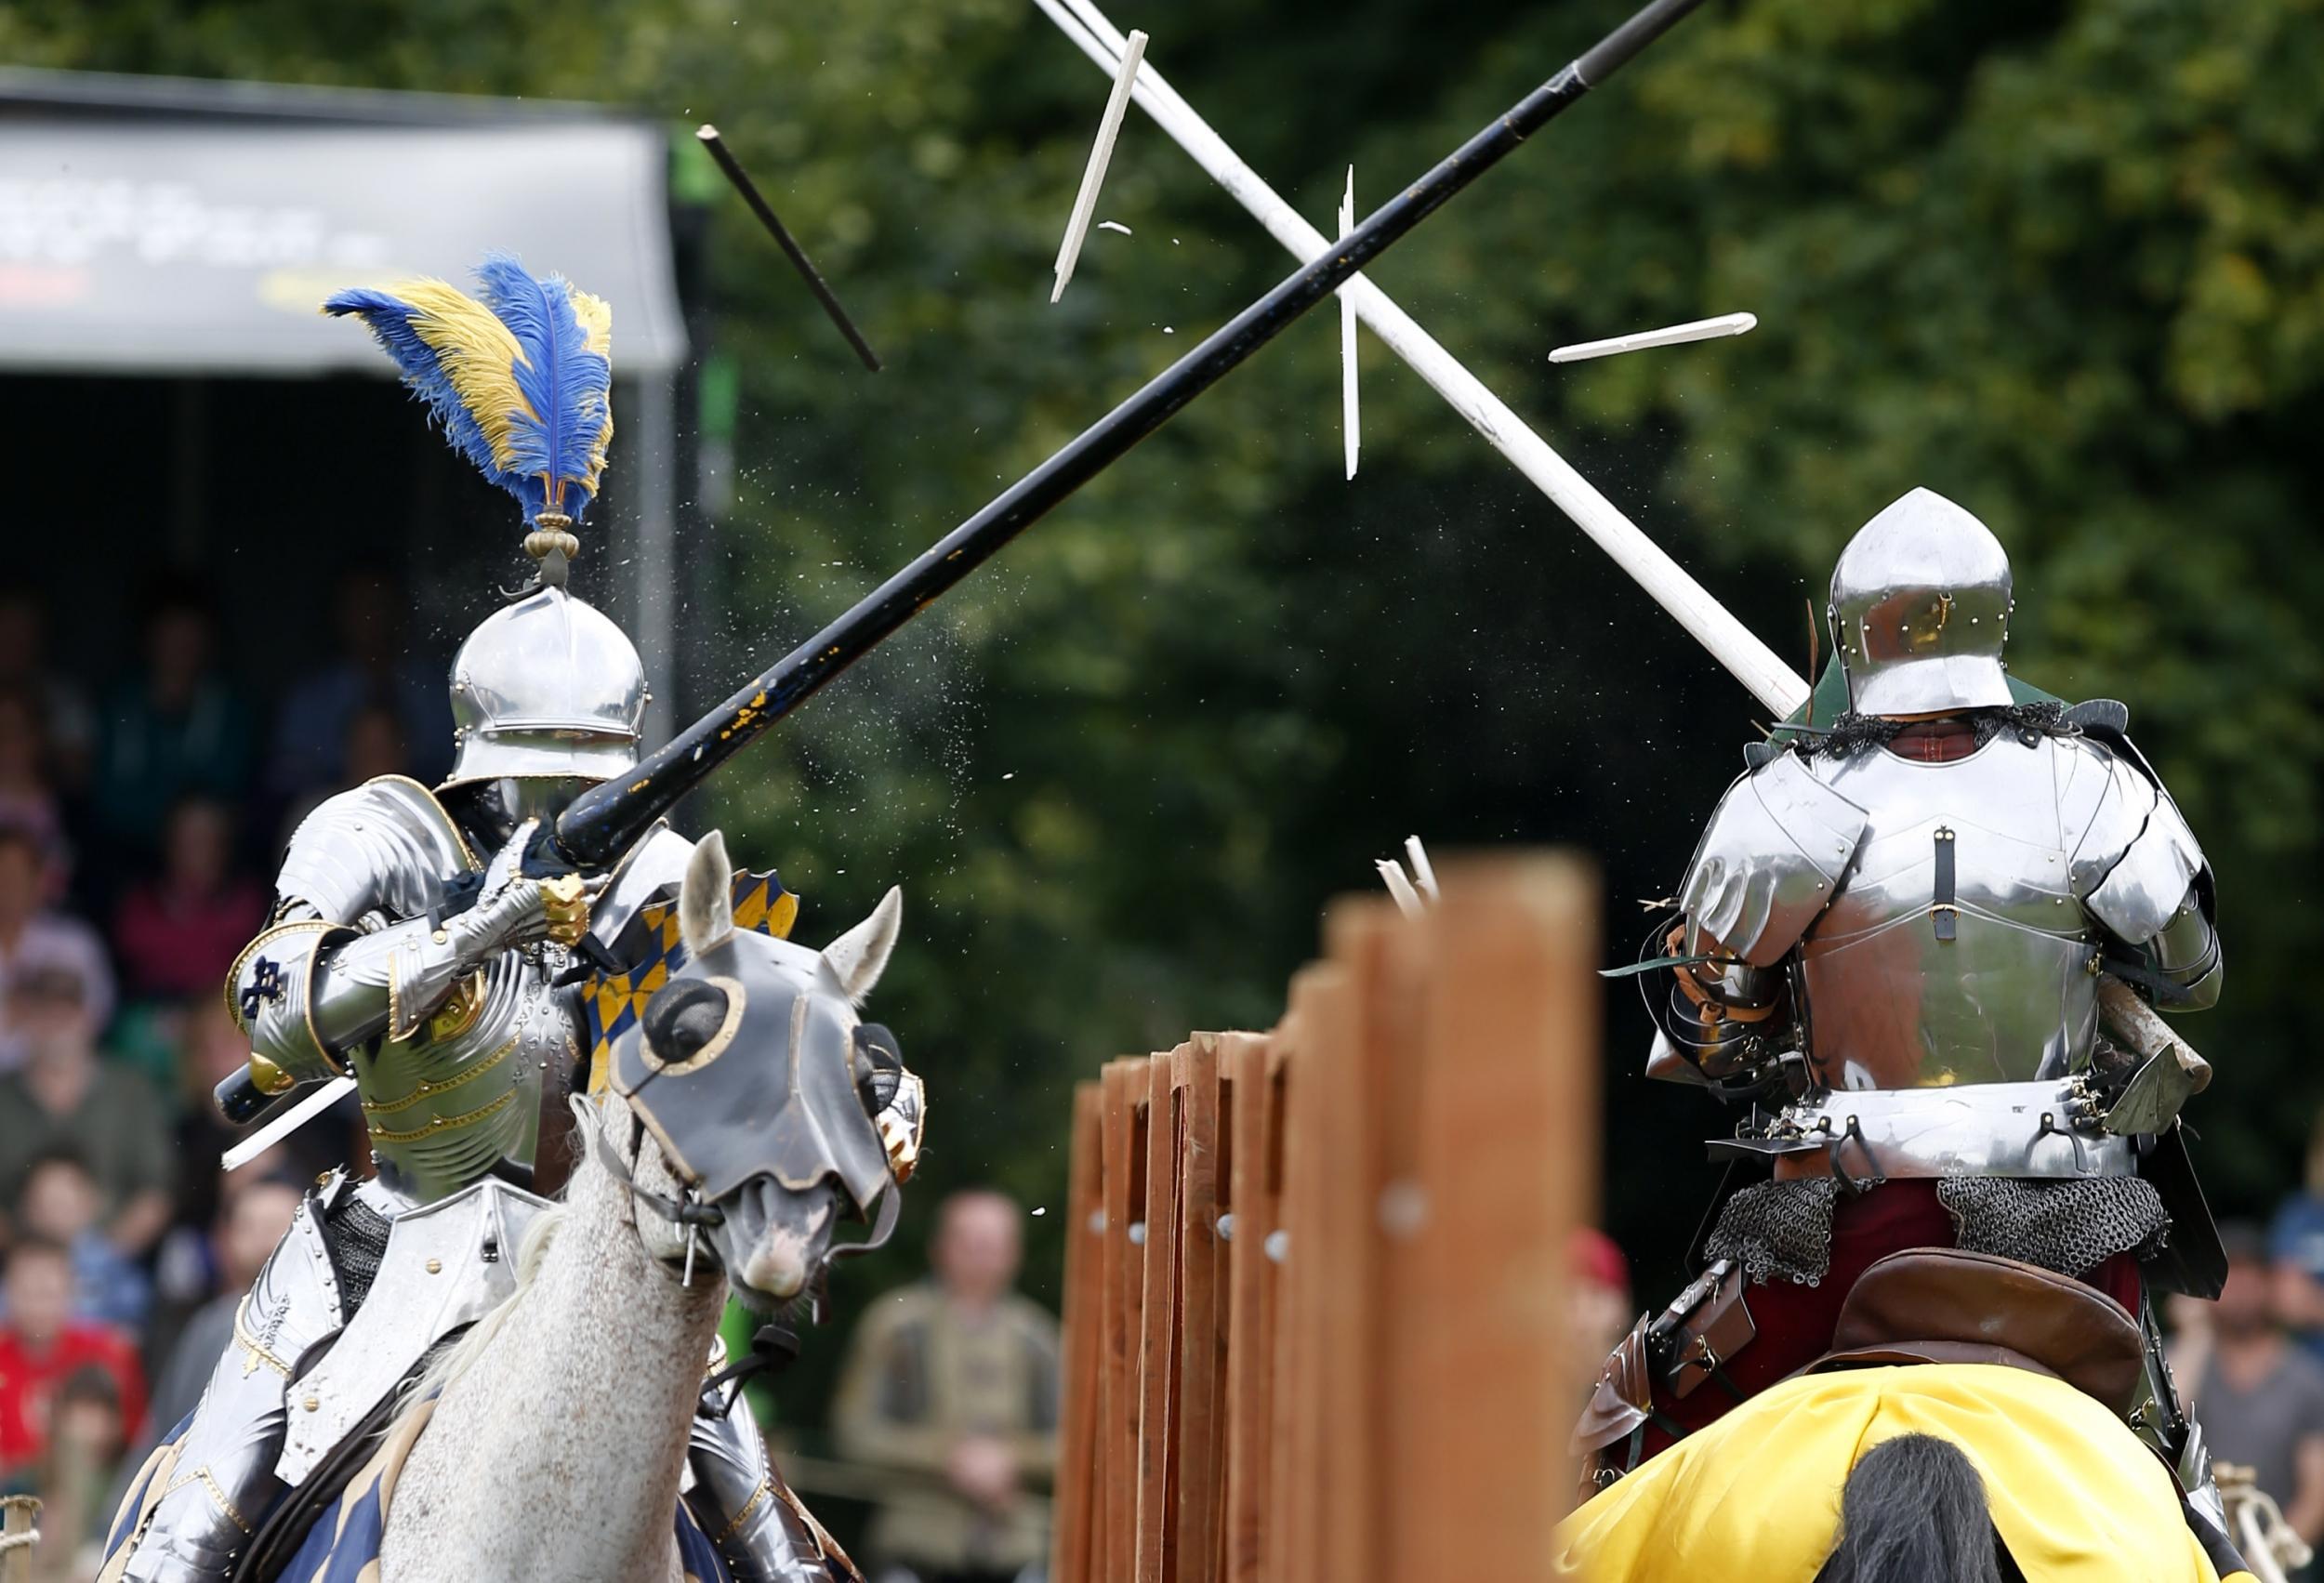 Knights joust at Leed's medieval festival